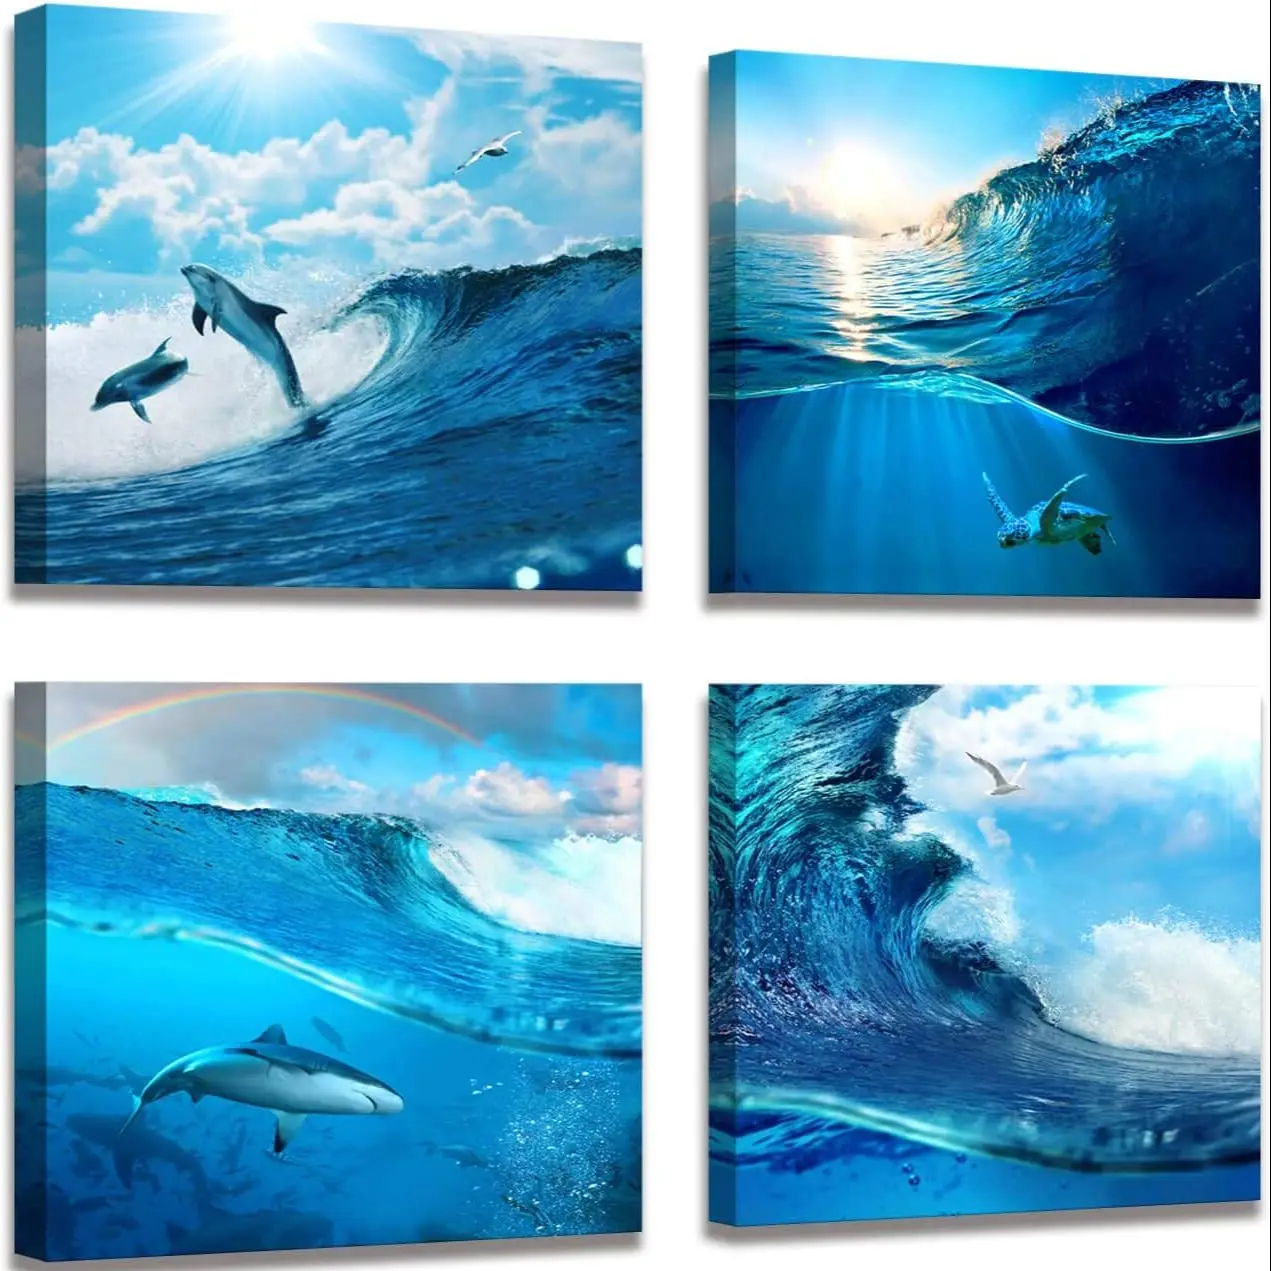 

4 Piece Dolphin Turtle Ocean Wave Beach Seascape Posters Canvas Picture Wall Art Home Decor Paintings for Kids Room Decorations